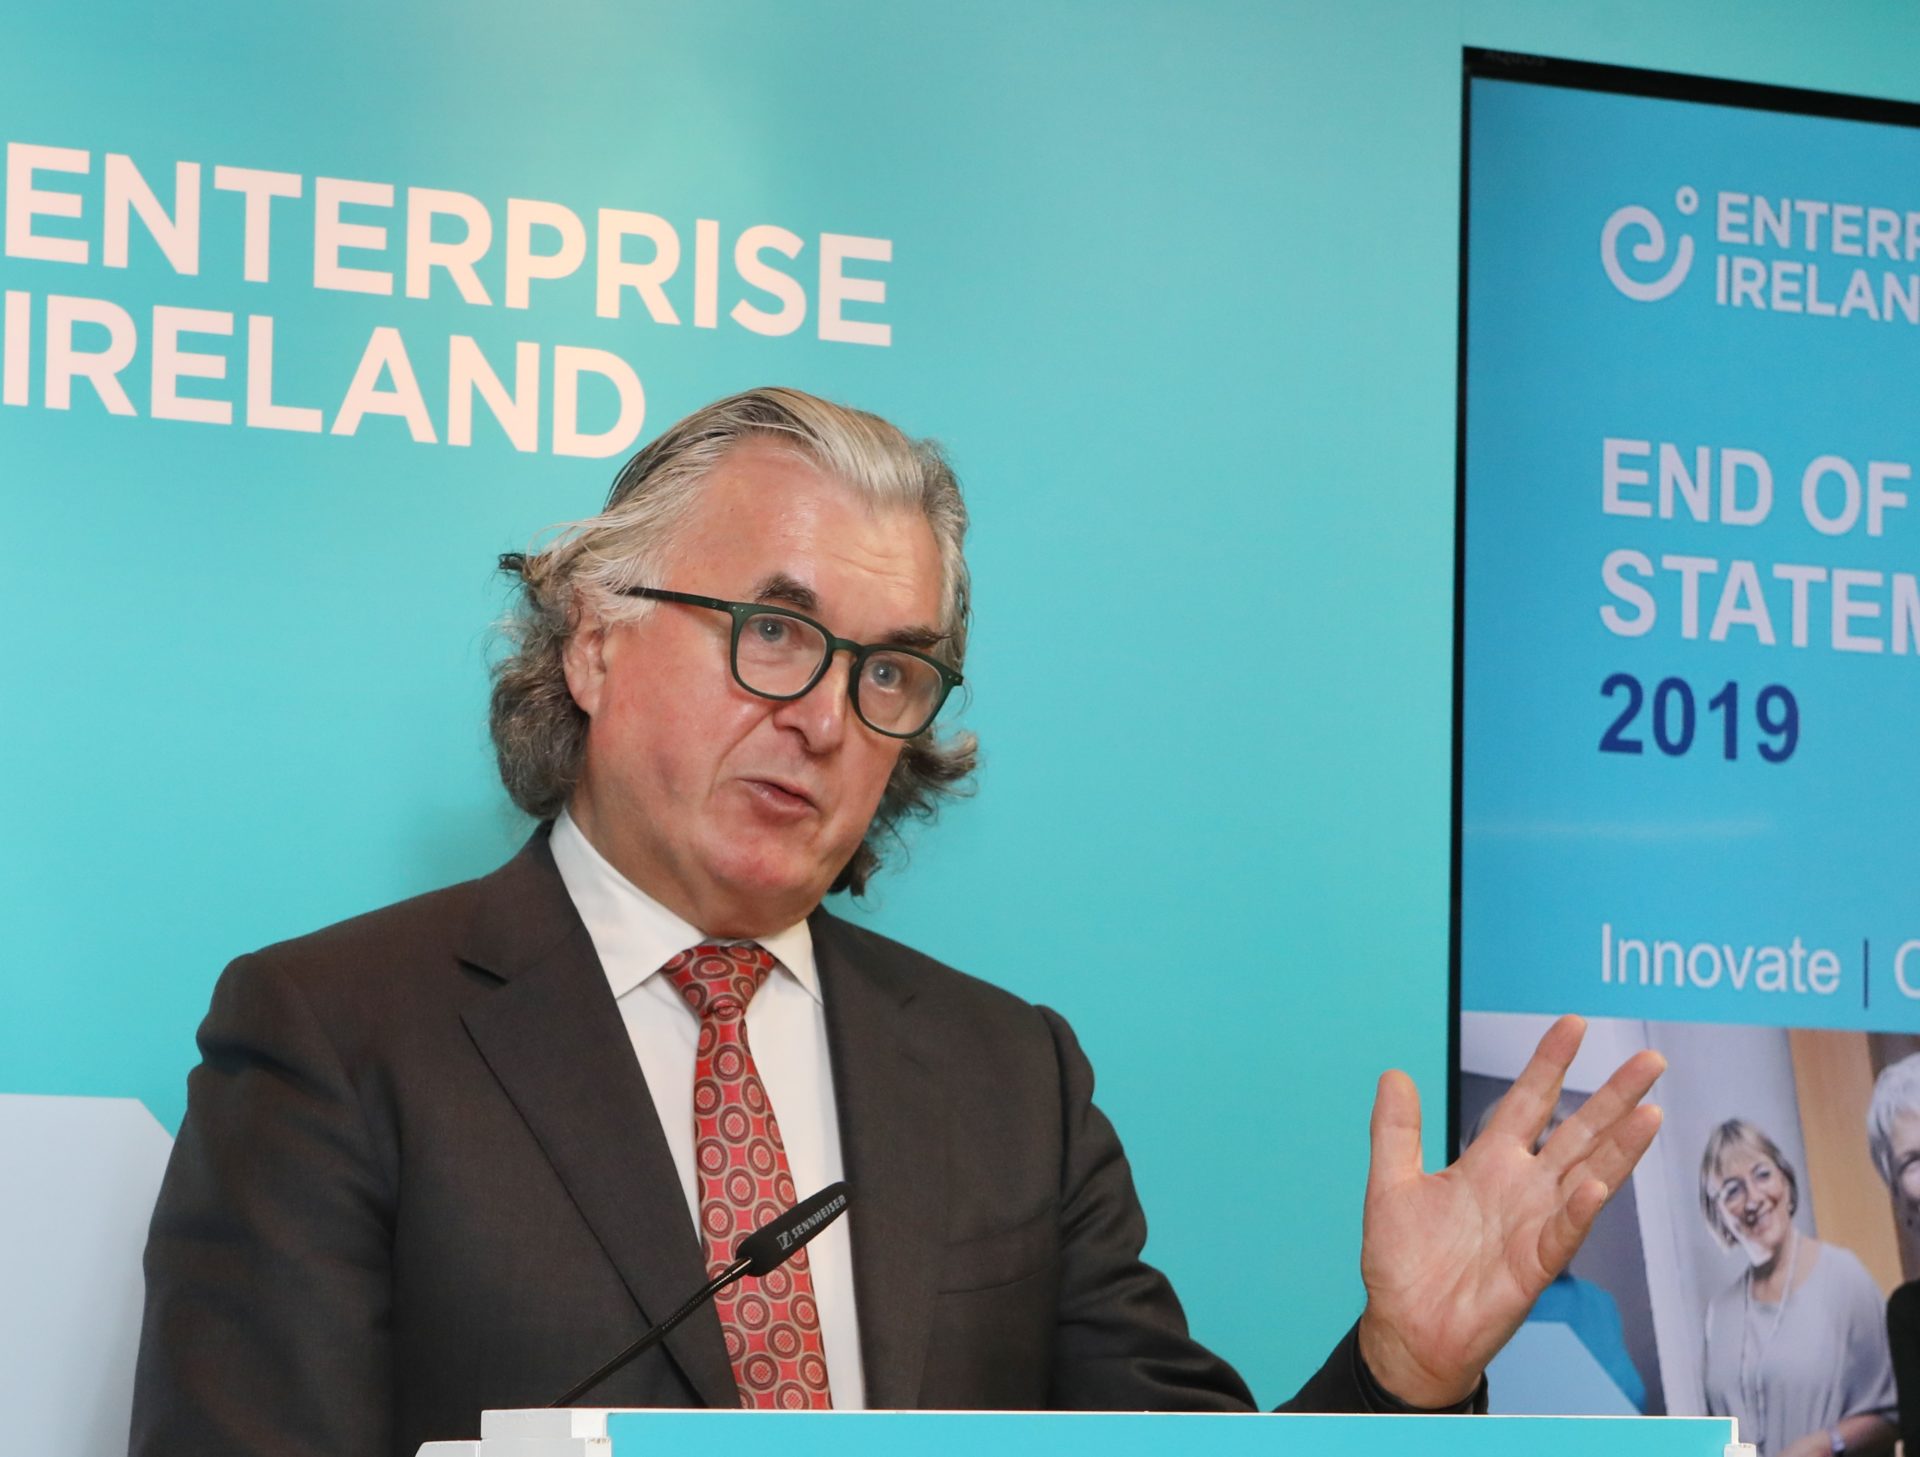  Then-Chairman of Enterprise Ireland Terence O’Rourke announces 2019 end of year results in Dublin, 7-1-19. 